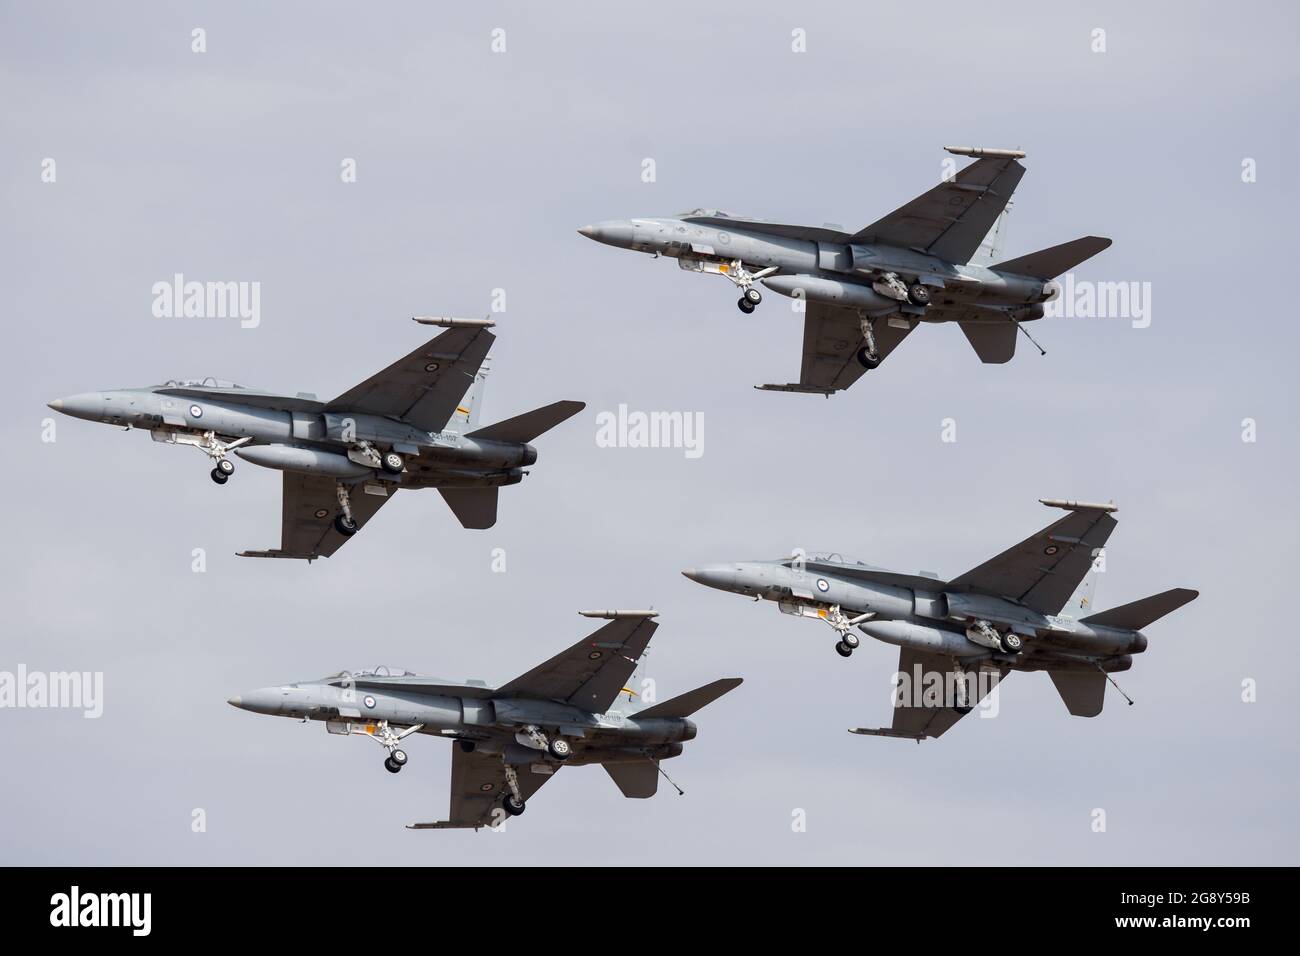 AVALON AIRPORT, AUSTRALIA - Jun 09, 2018: Four fighter jets during Melbourne international airshow Stock Photo